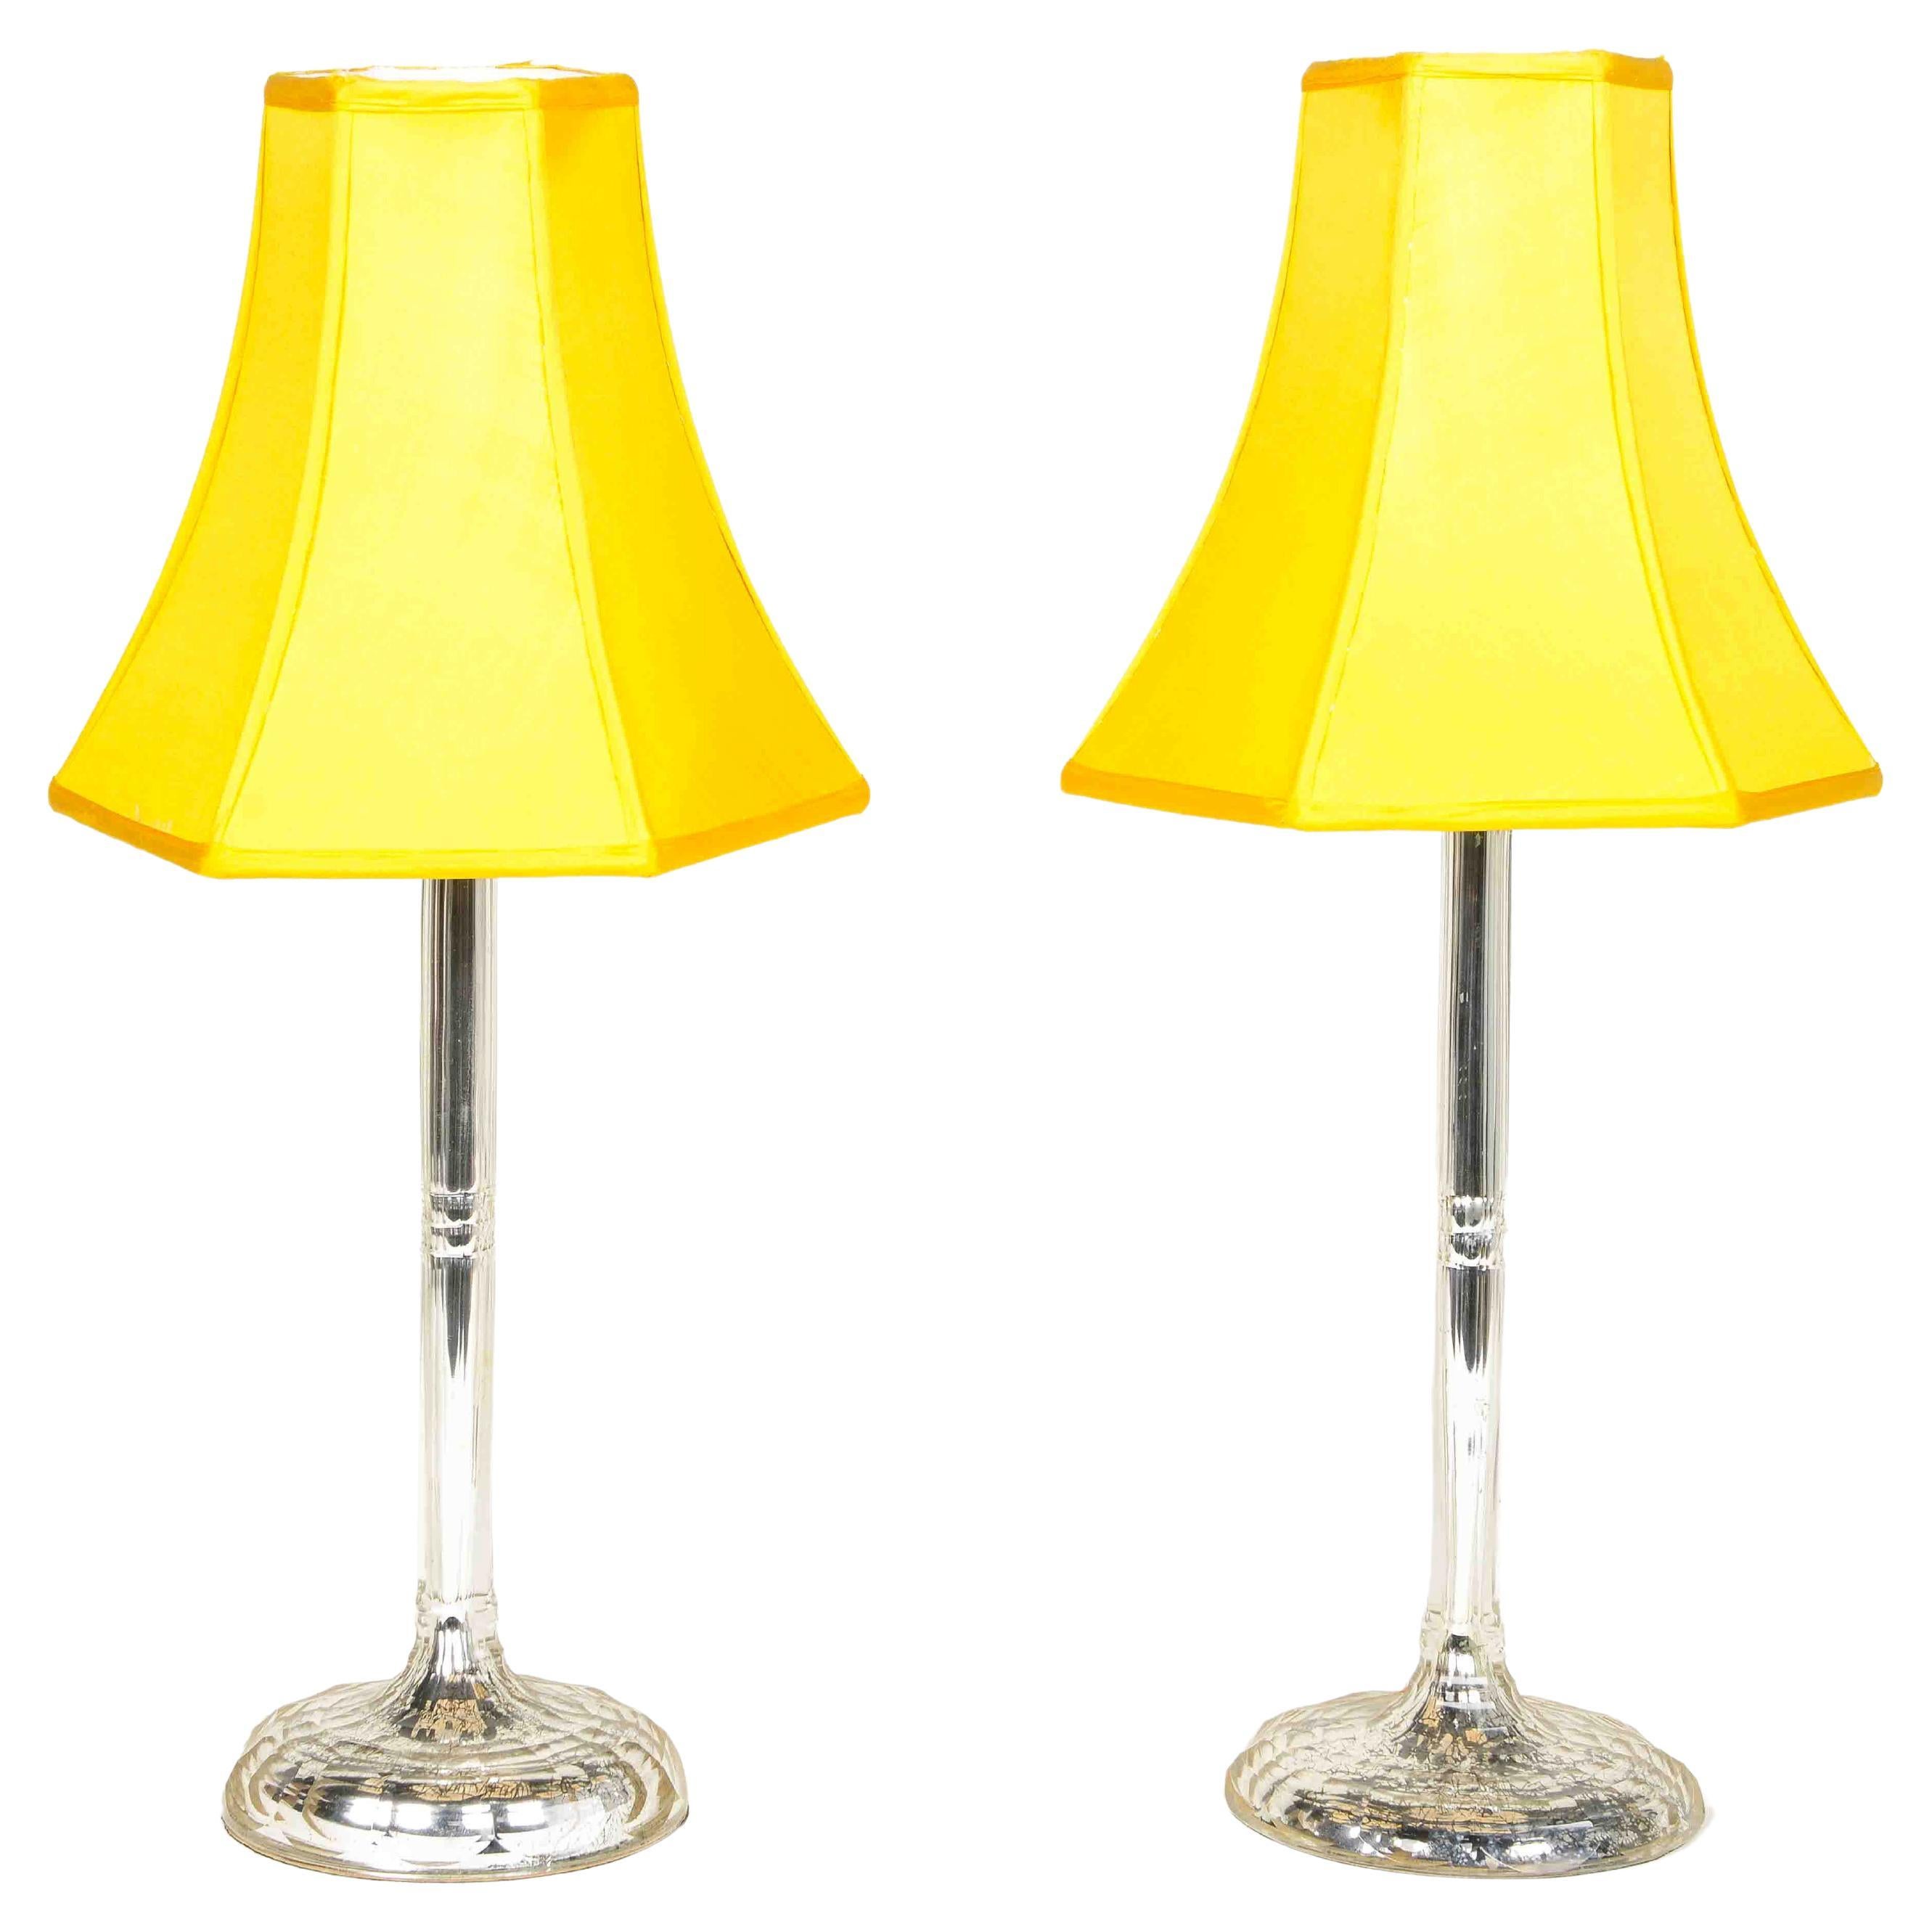 A Pair of Mid-Century Mercury Glass Table Lamps For Sale